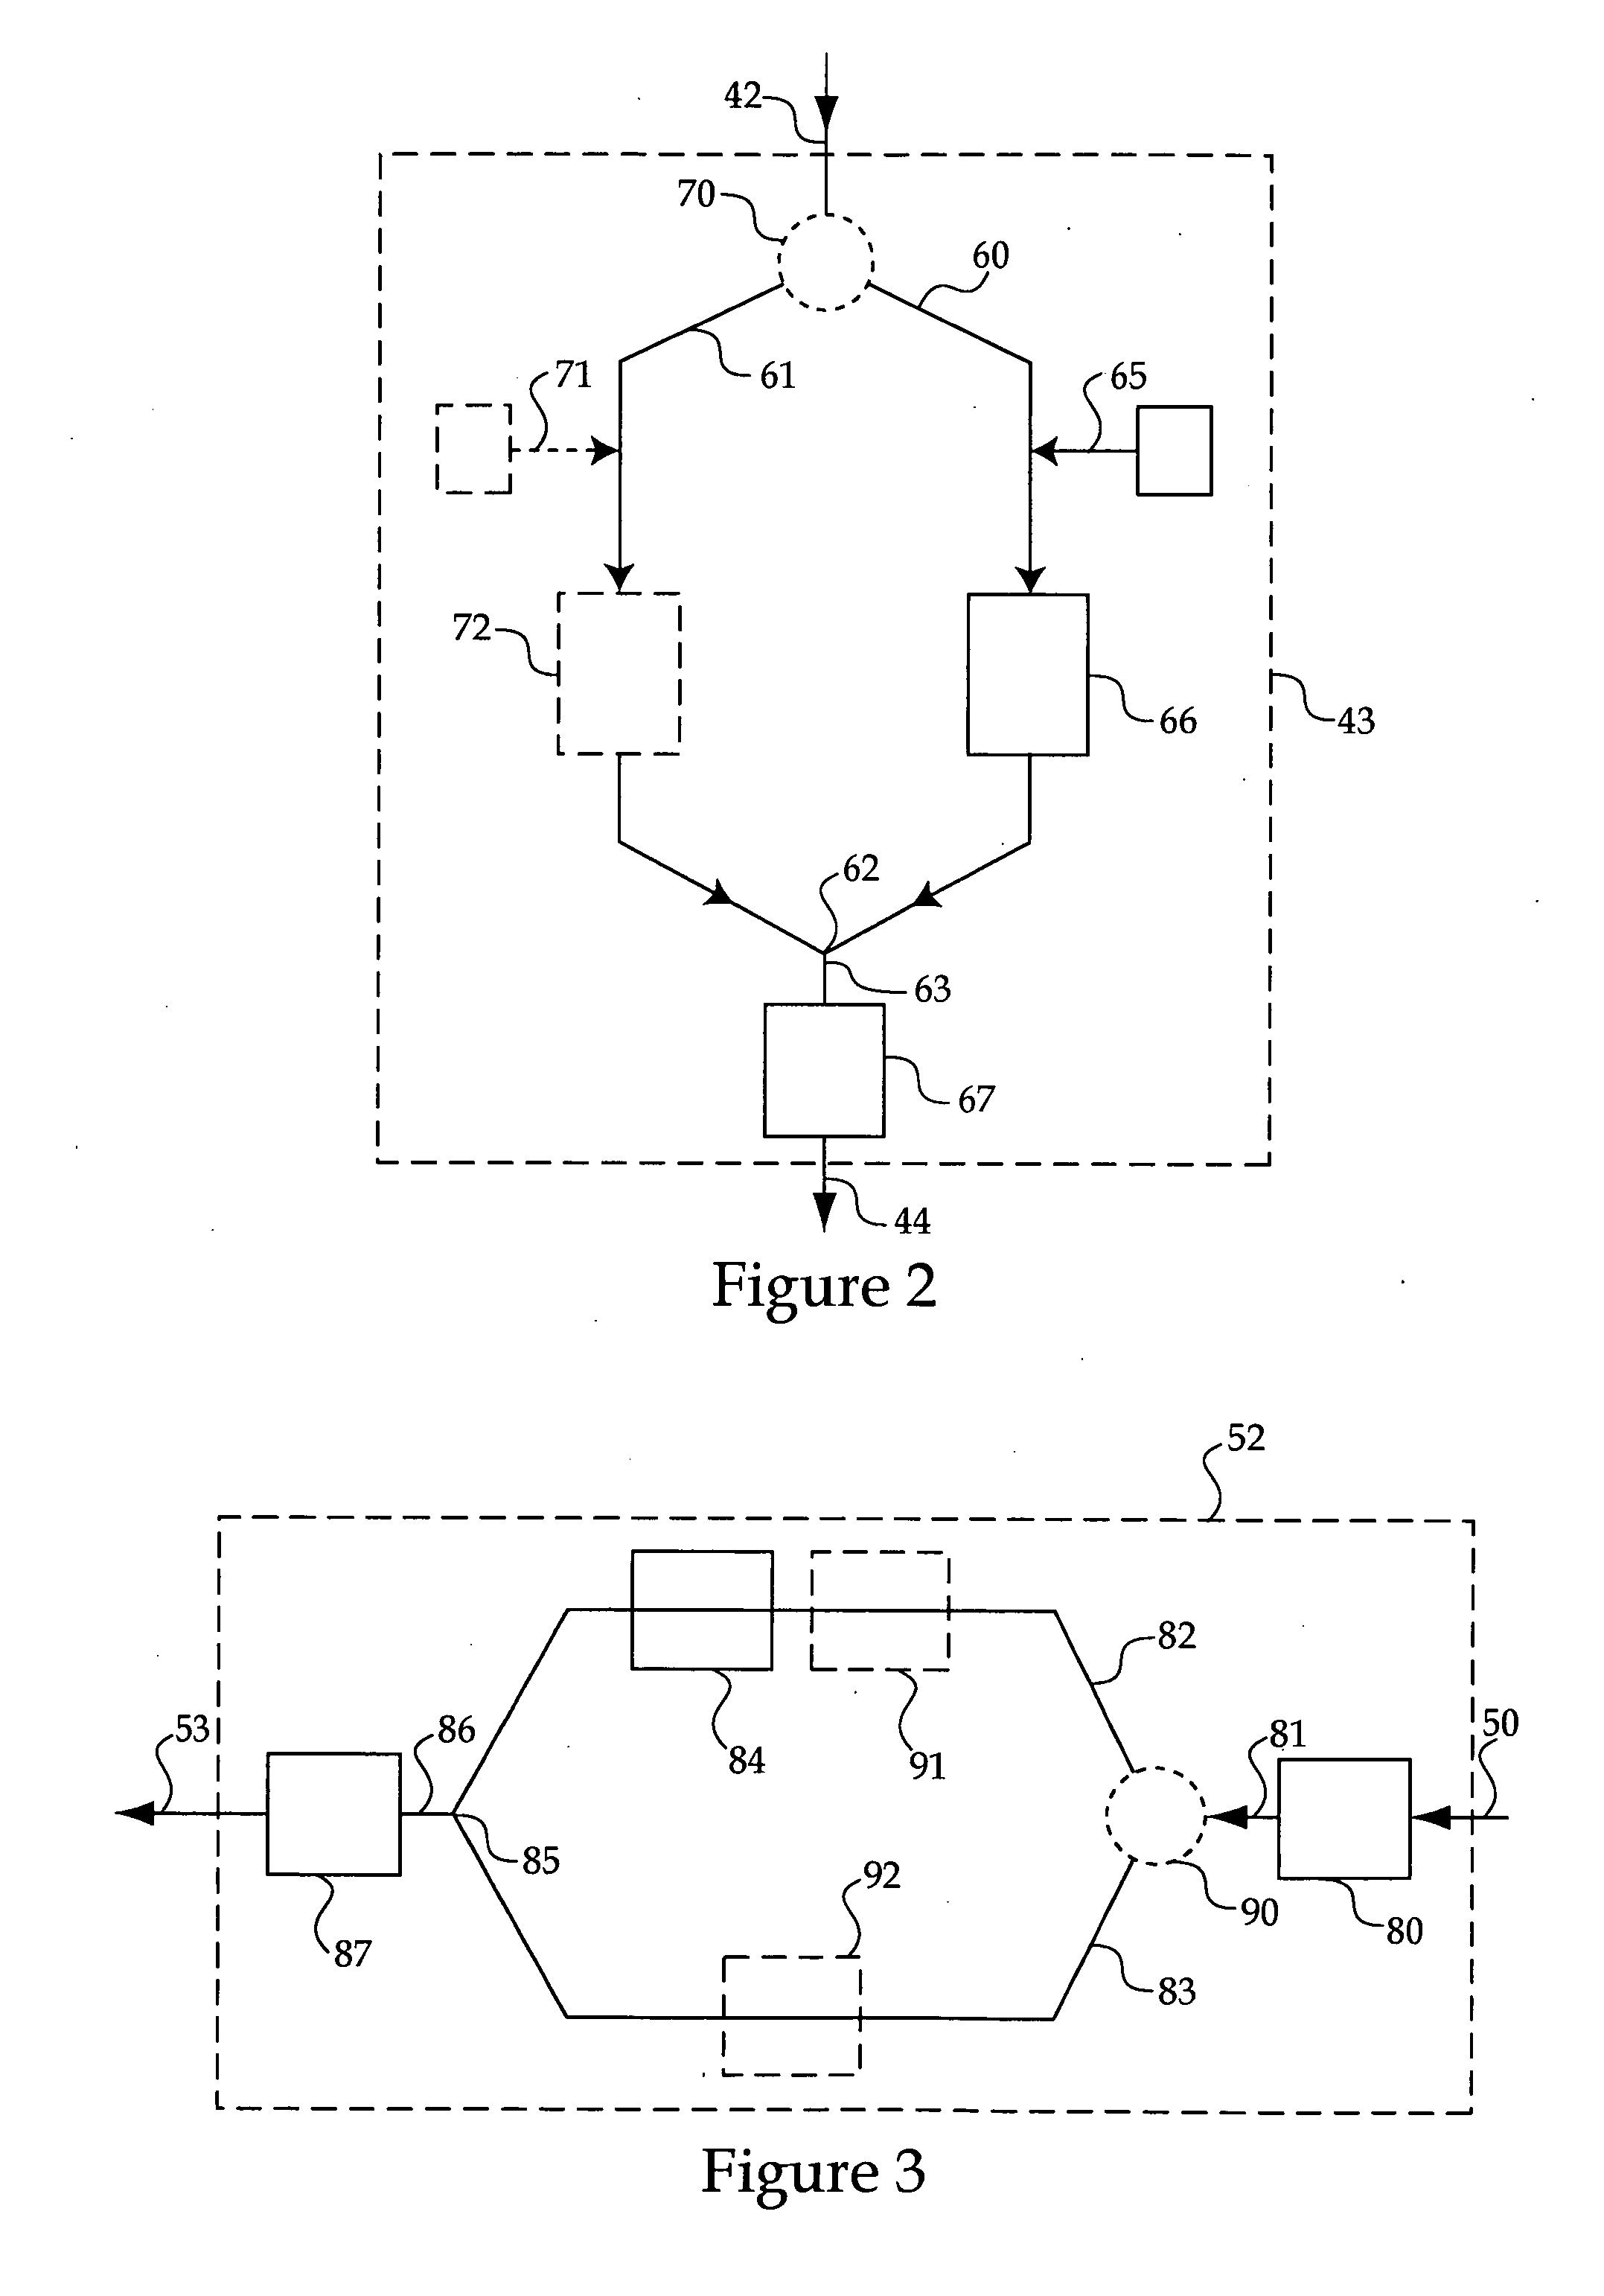 Engine system arrangement with on-board ammonia production and exhaust after treatment system